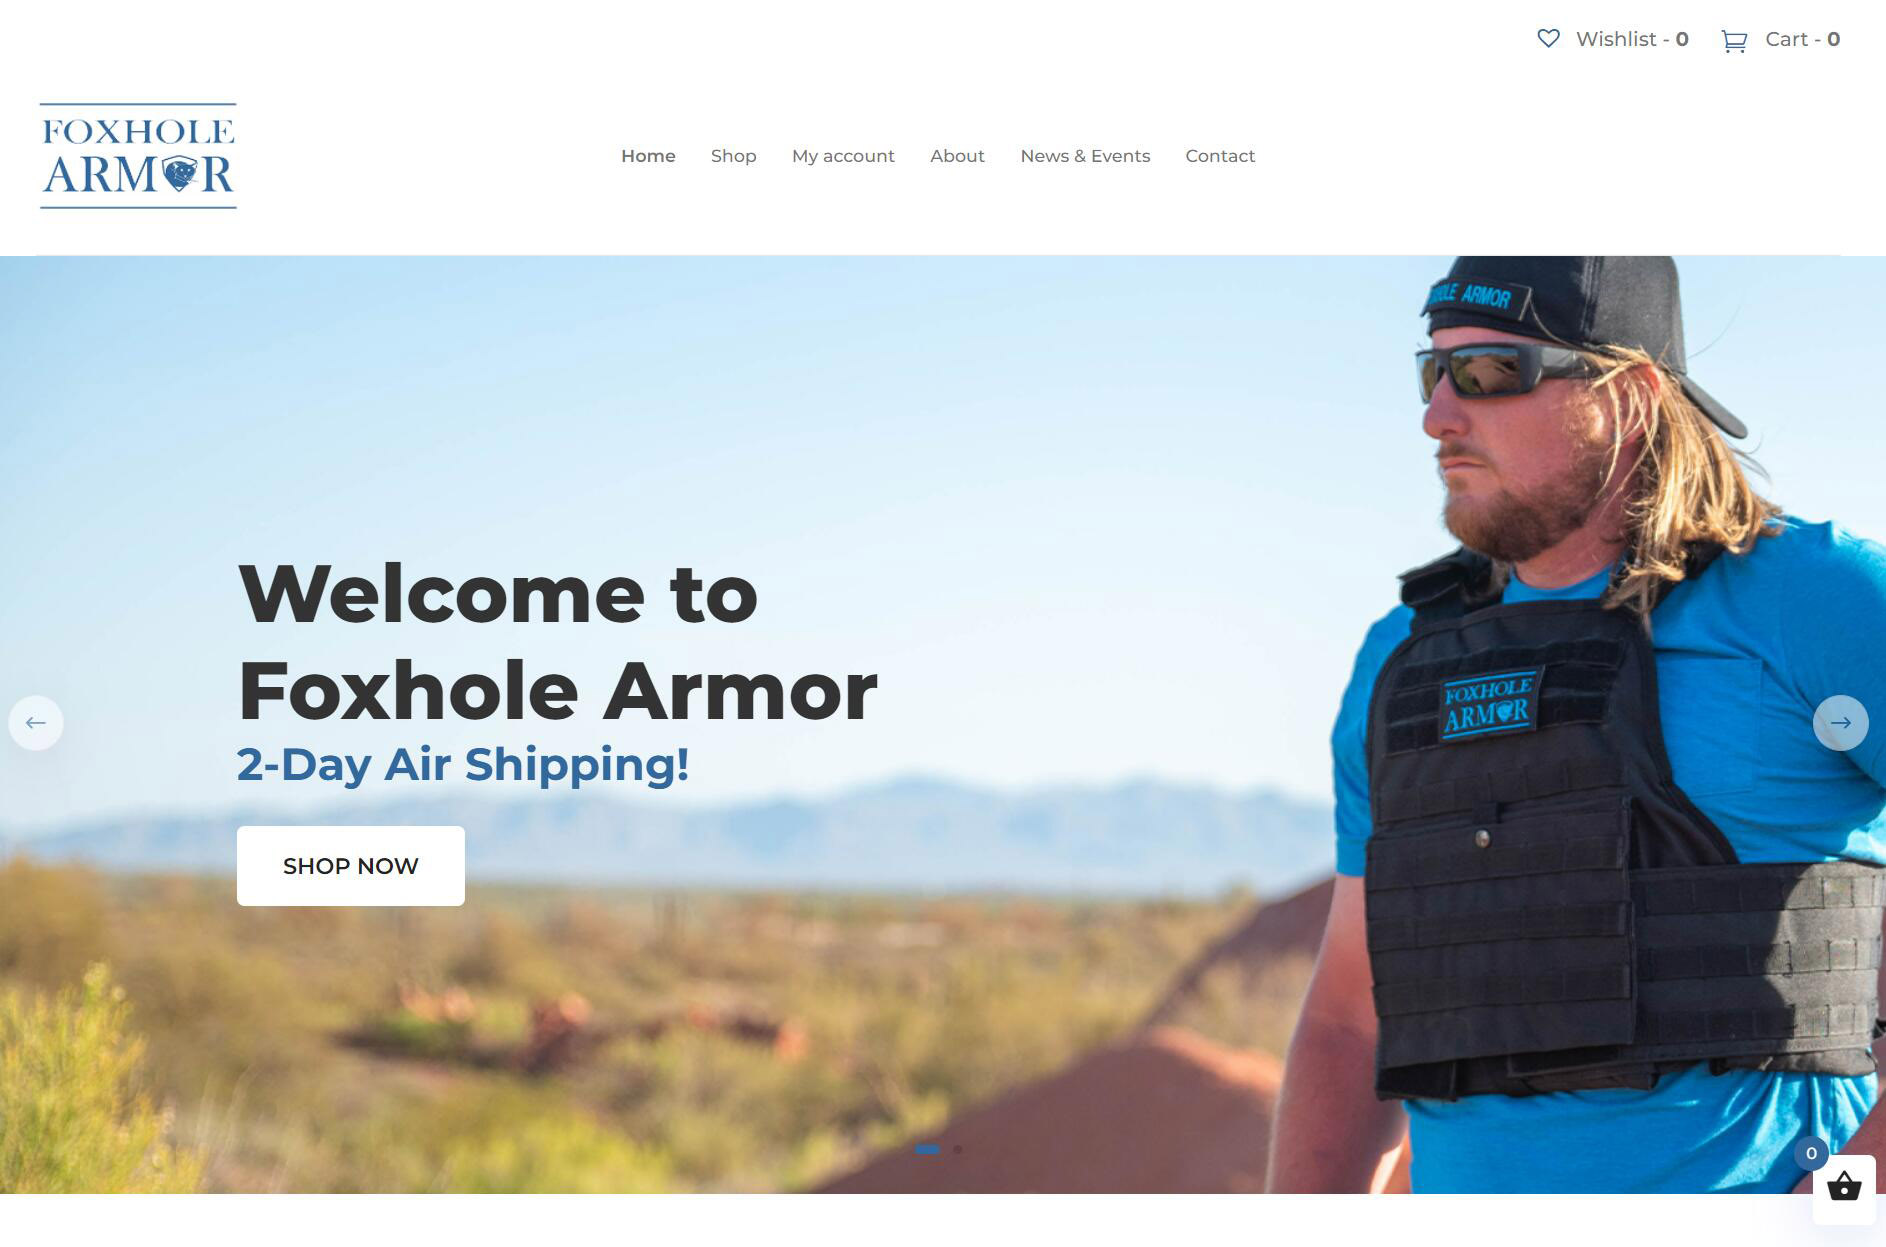 New offer launched: Foxhole Armor Affiliate Program